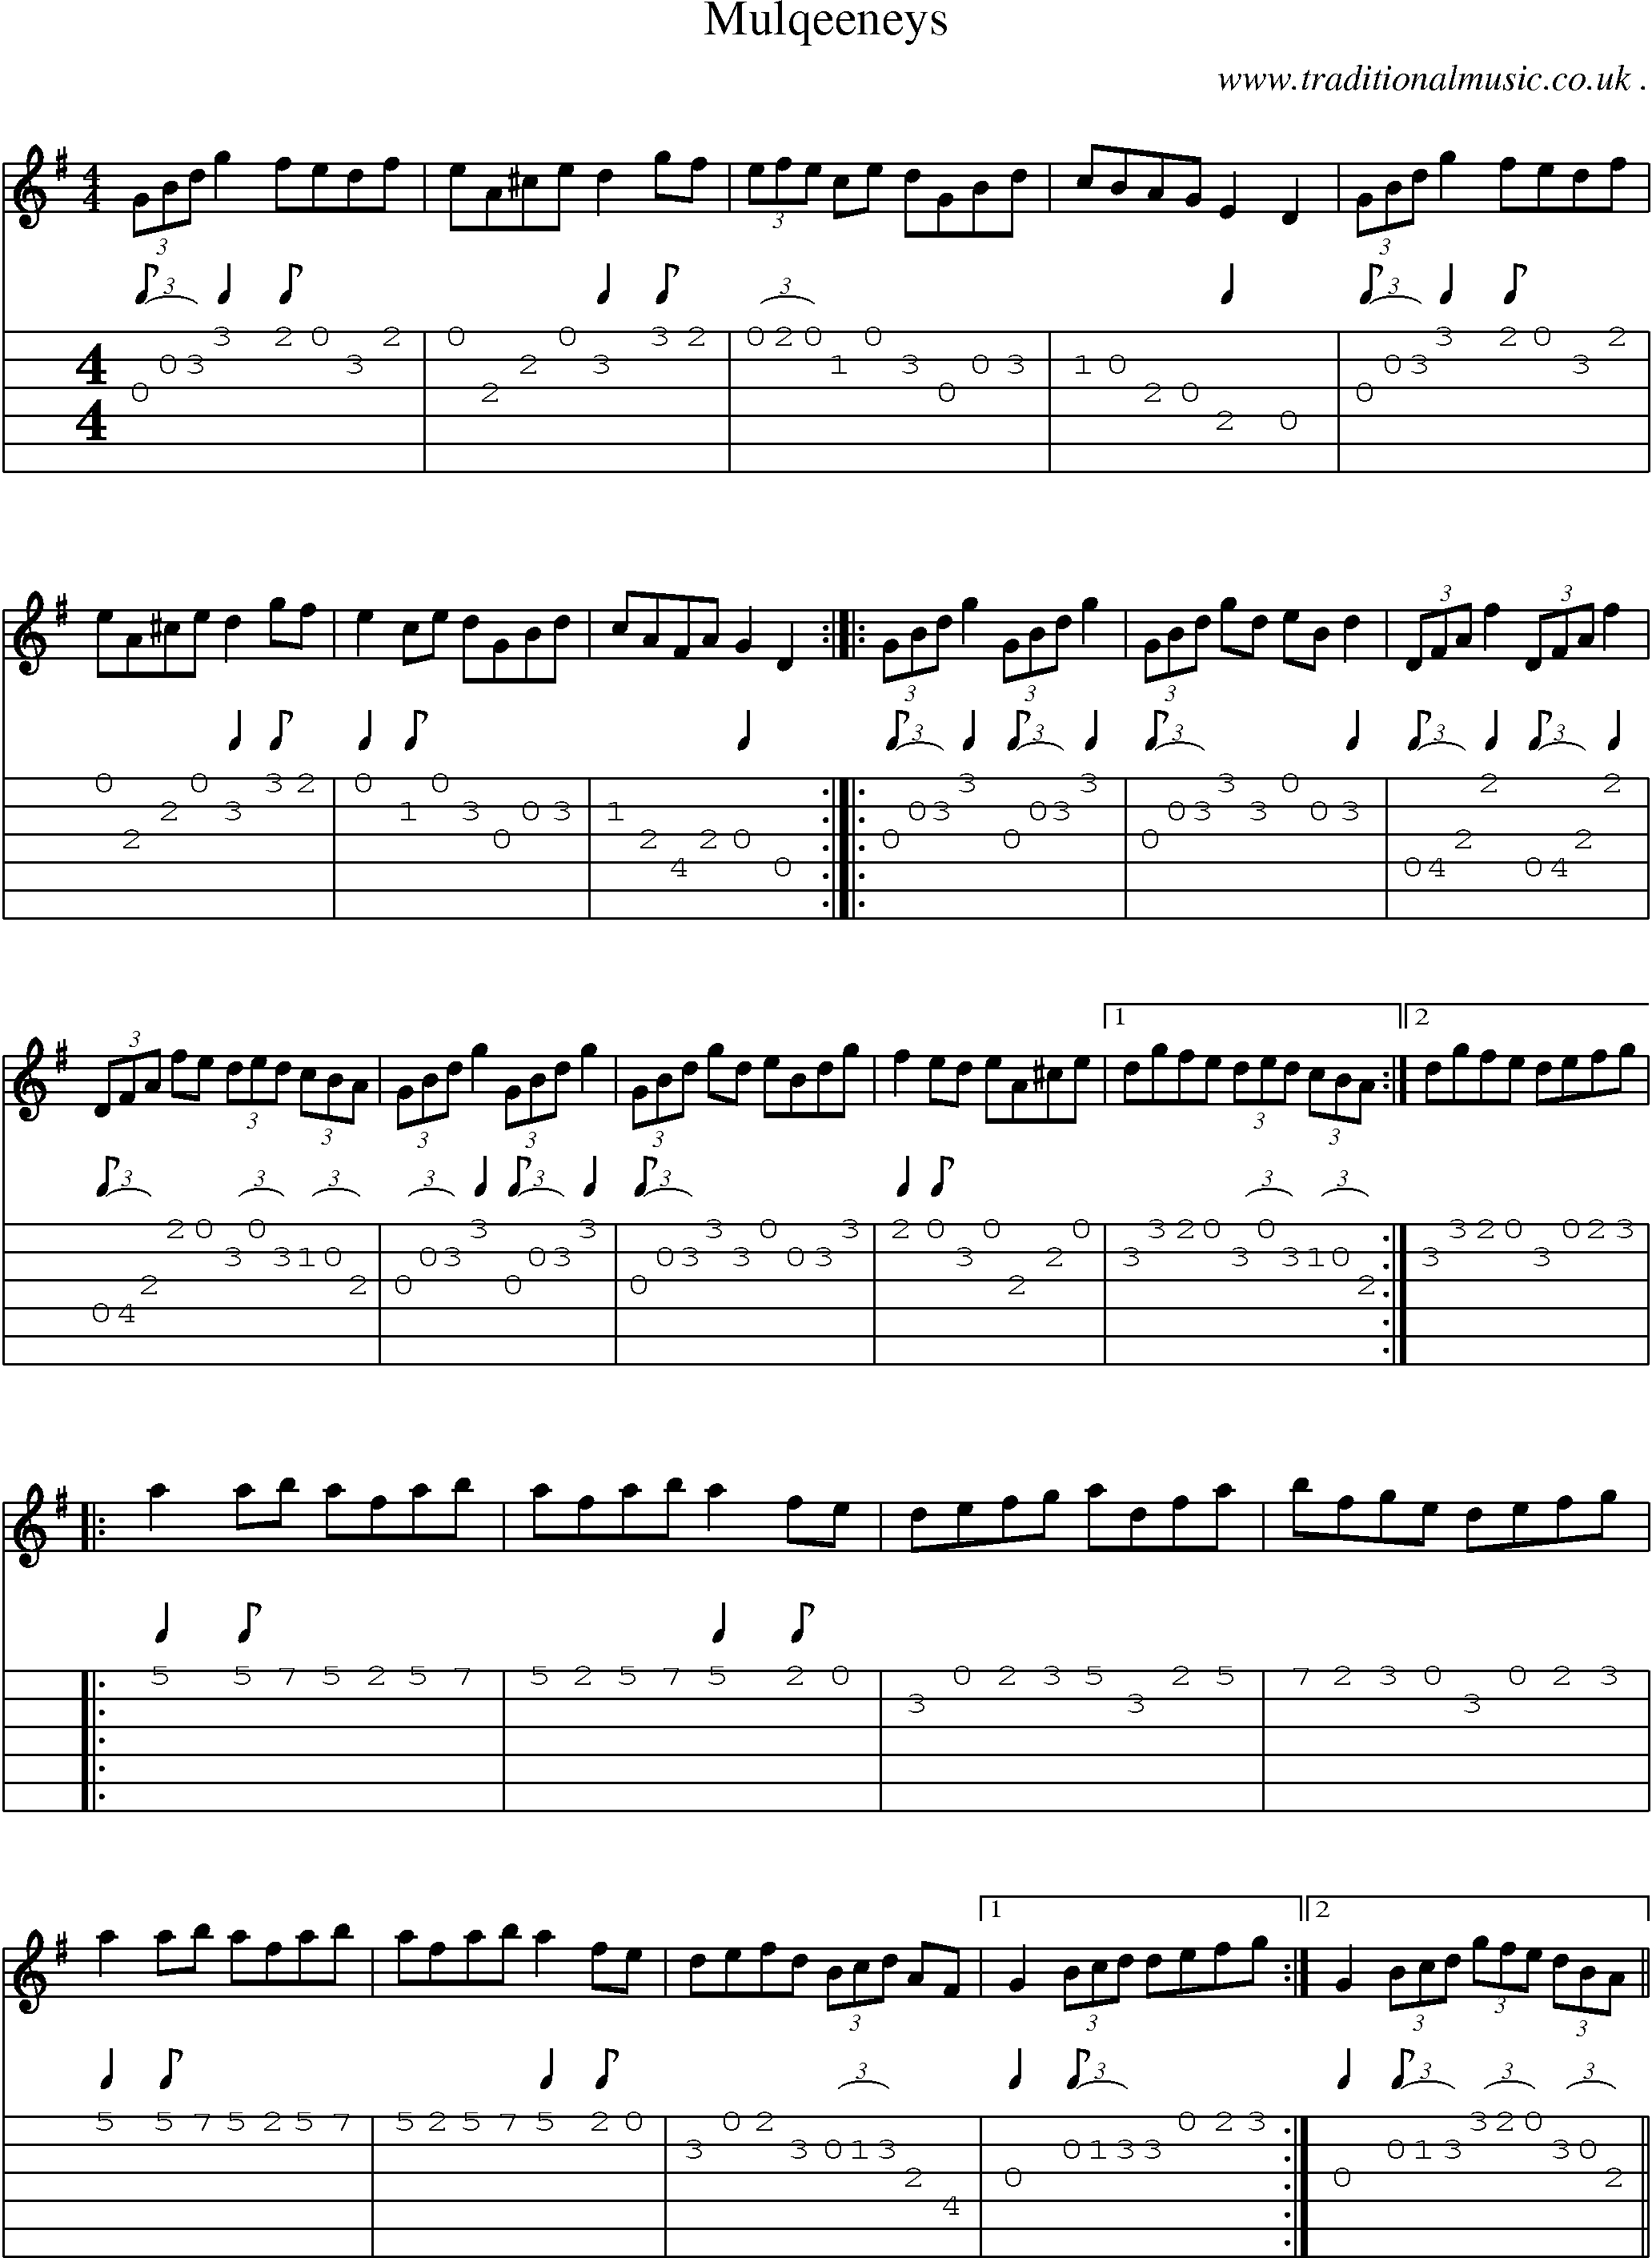 Sheet-Music and Guitar Tabs for Mulqeeneys